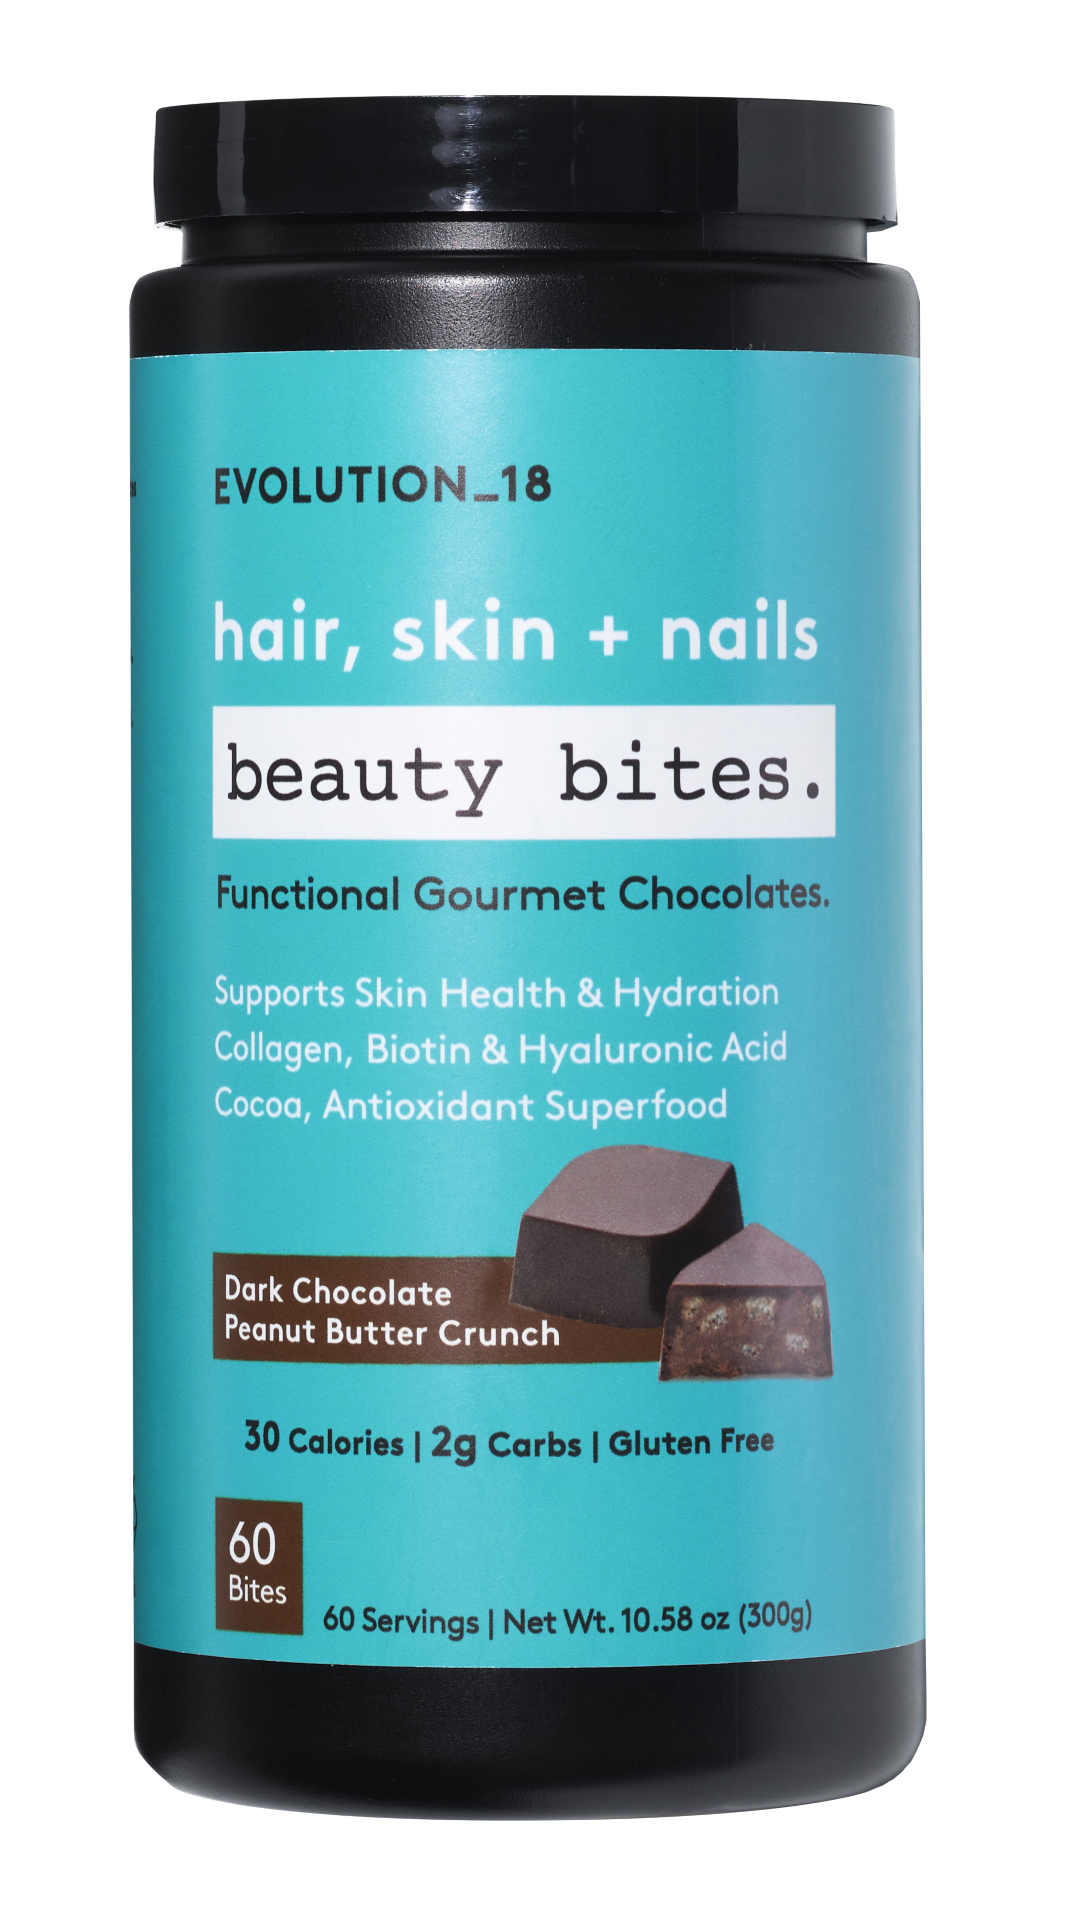 EVOLUTION_18 Beauty Bites, Dark Chocolate Peanut Butter Crunch, Functional Gourmet Chocolates, Collagen, Biotin, Hyaluronic Acid, for Hair, Skin & Nails, 30 Calories, 60 count - image 1 of 11